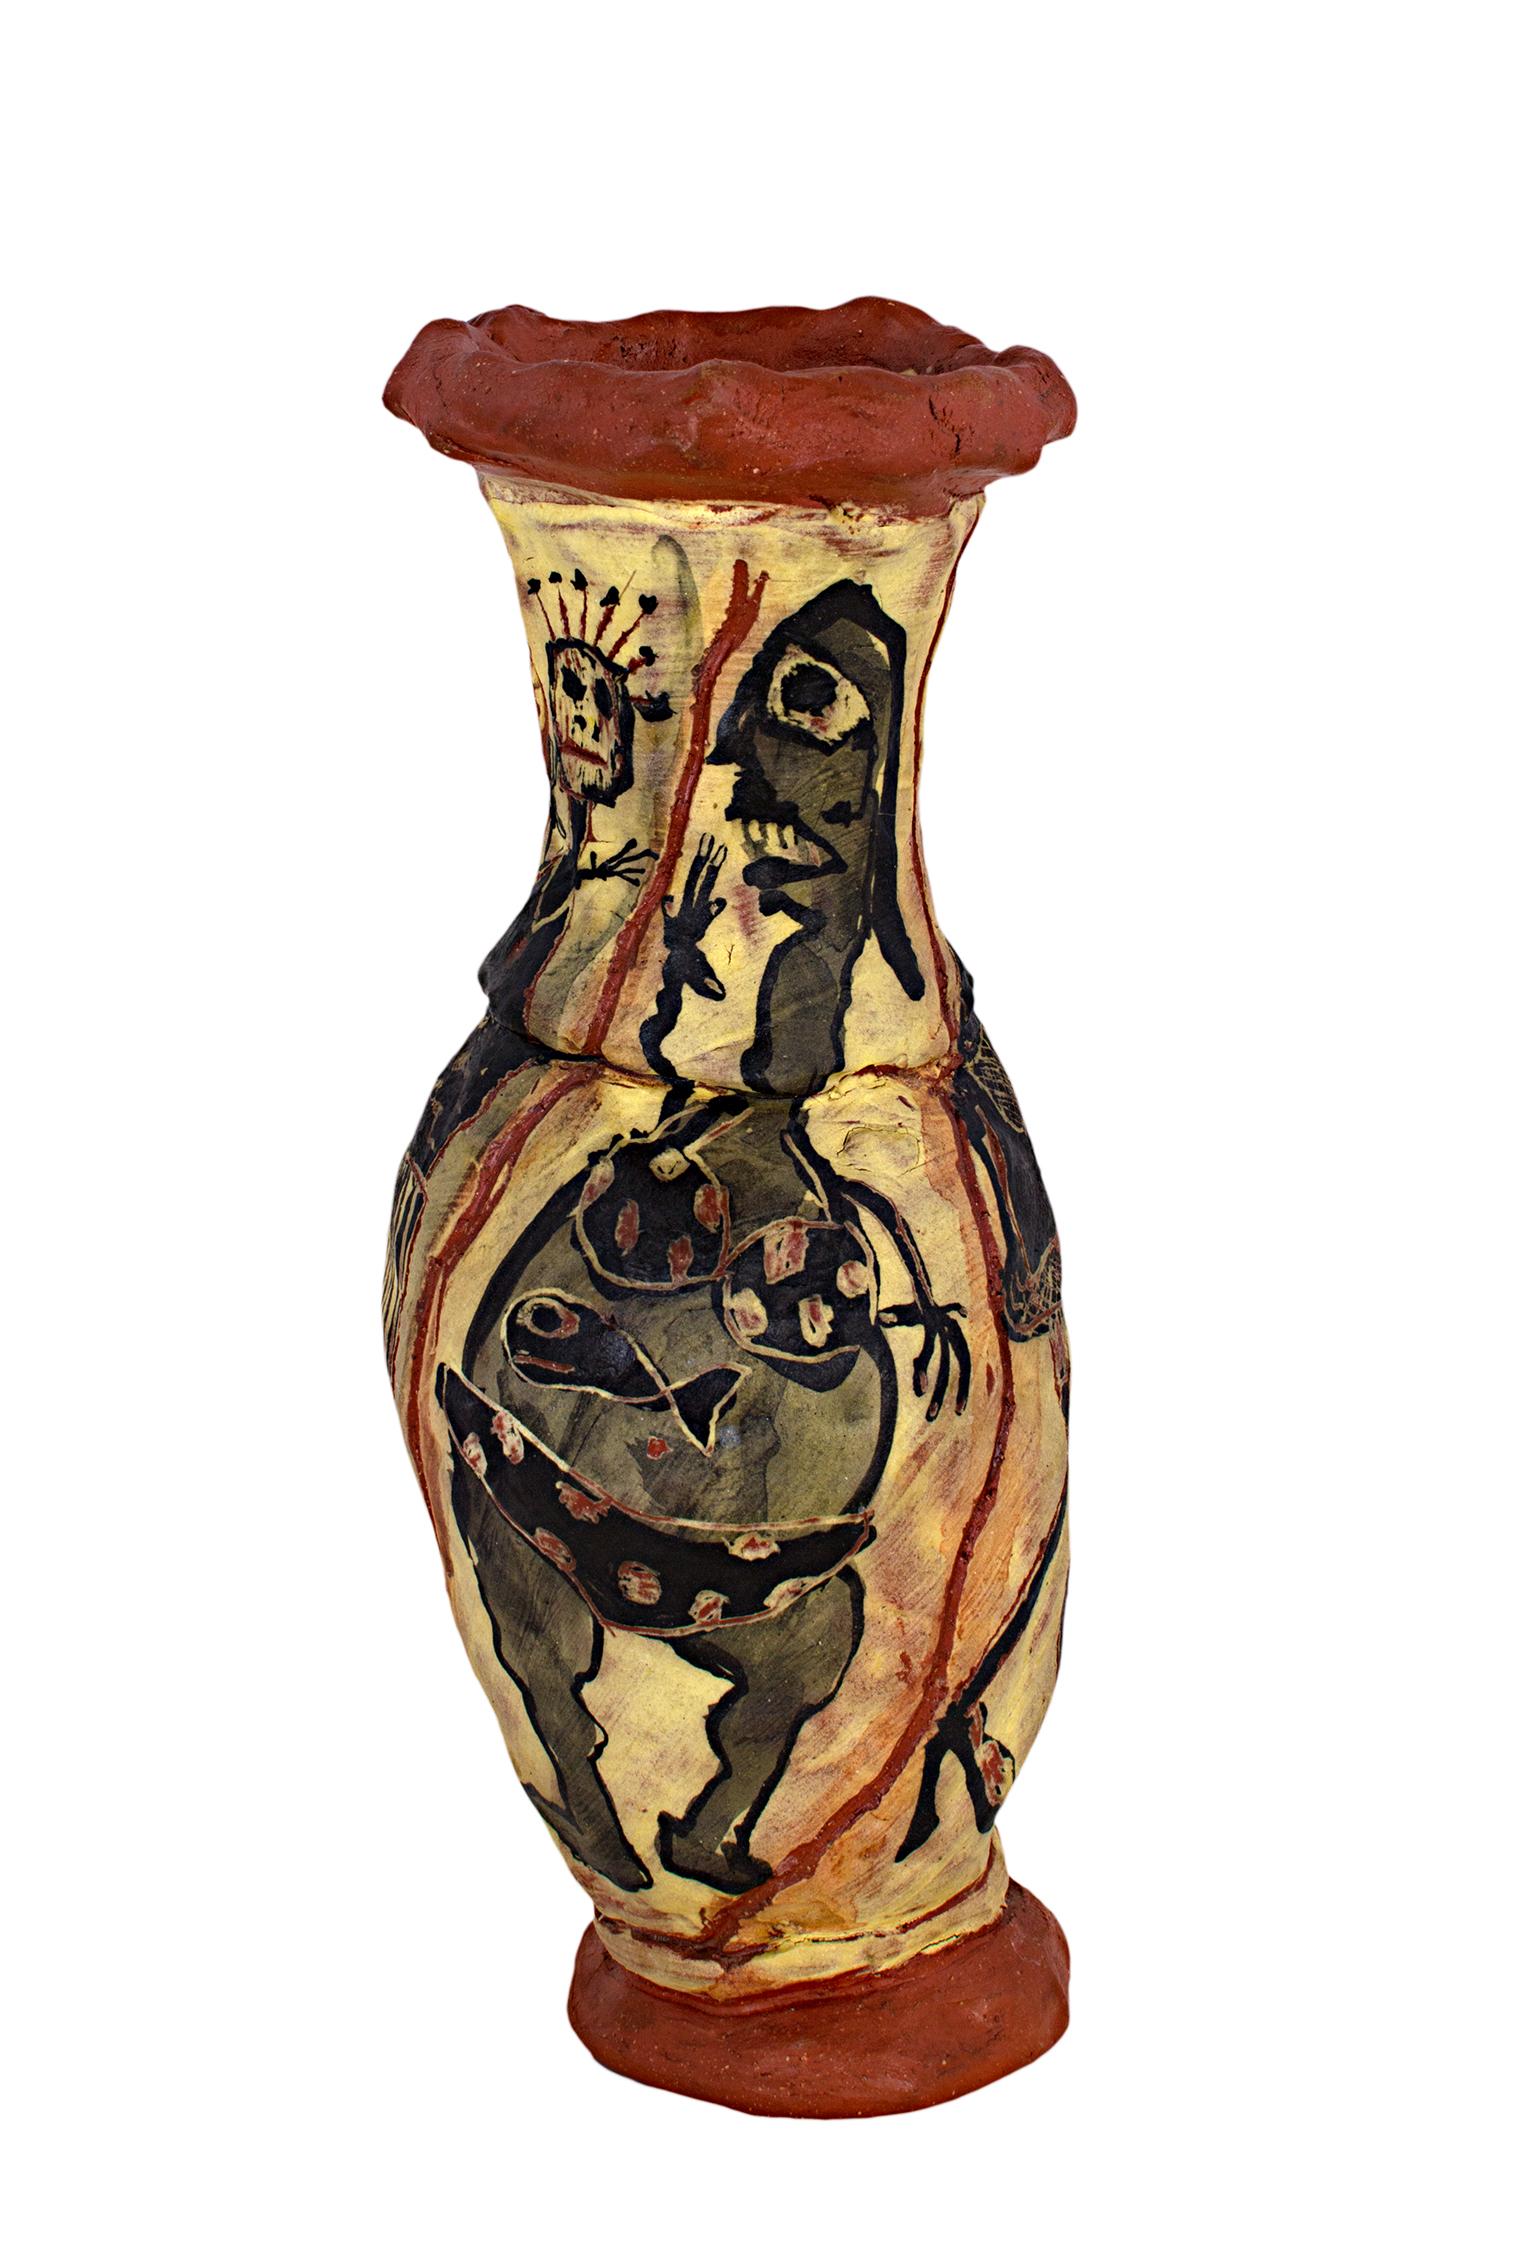 "Untitled Vase, " Neo-Expressionist Ceramic Vase signed by Michael Gross